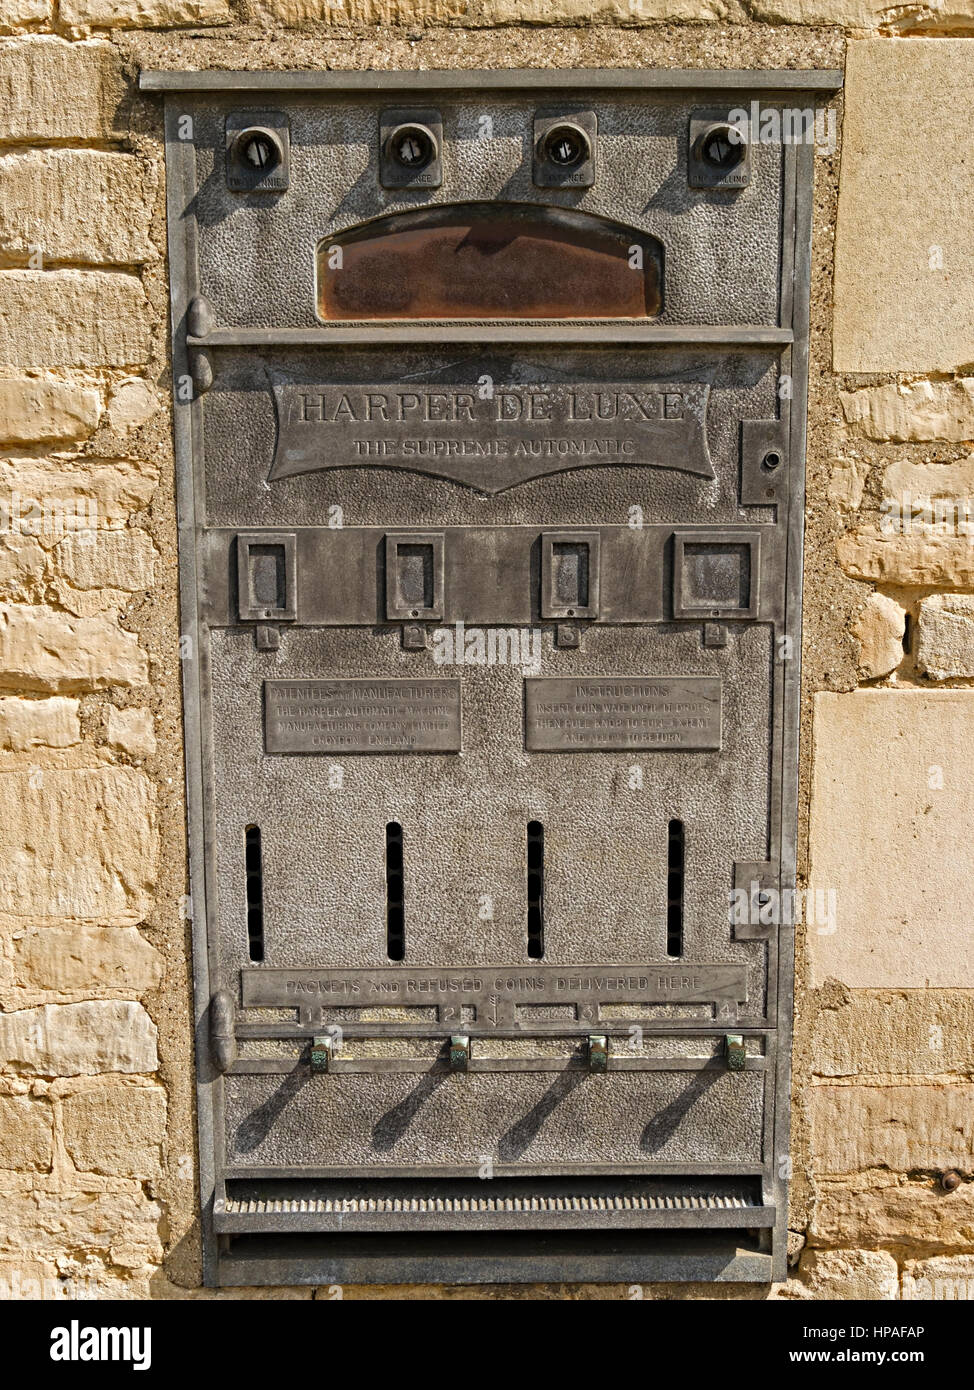 Old Harper De Luxe, wall mounted automatic cigarette vending slot machine, St. Martins, Stamford, Lincolnshire, England, UK Stock Photo